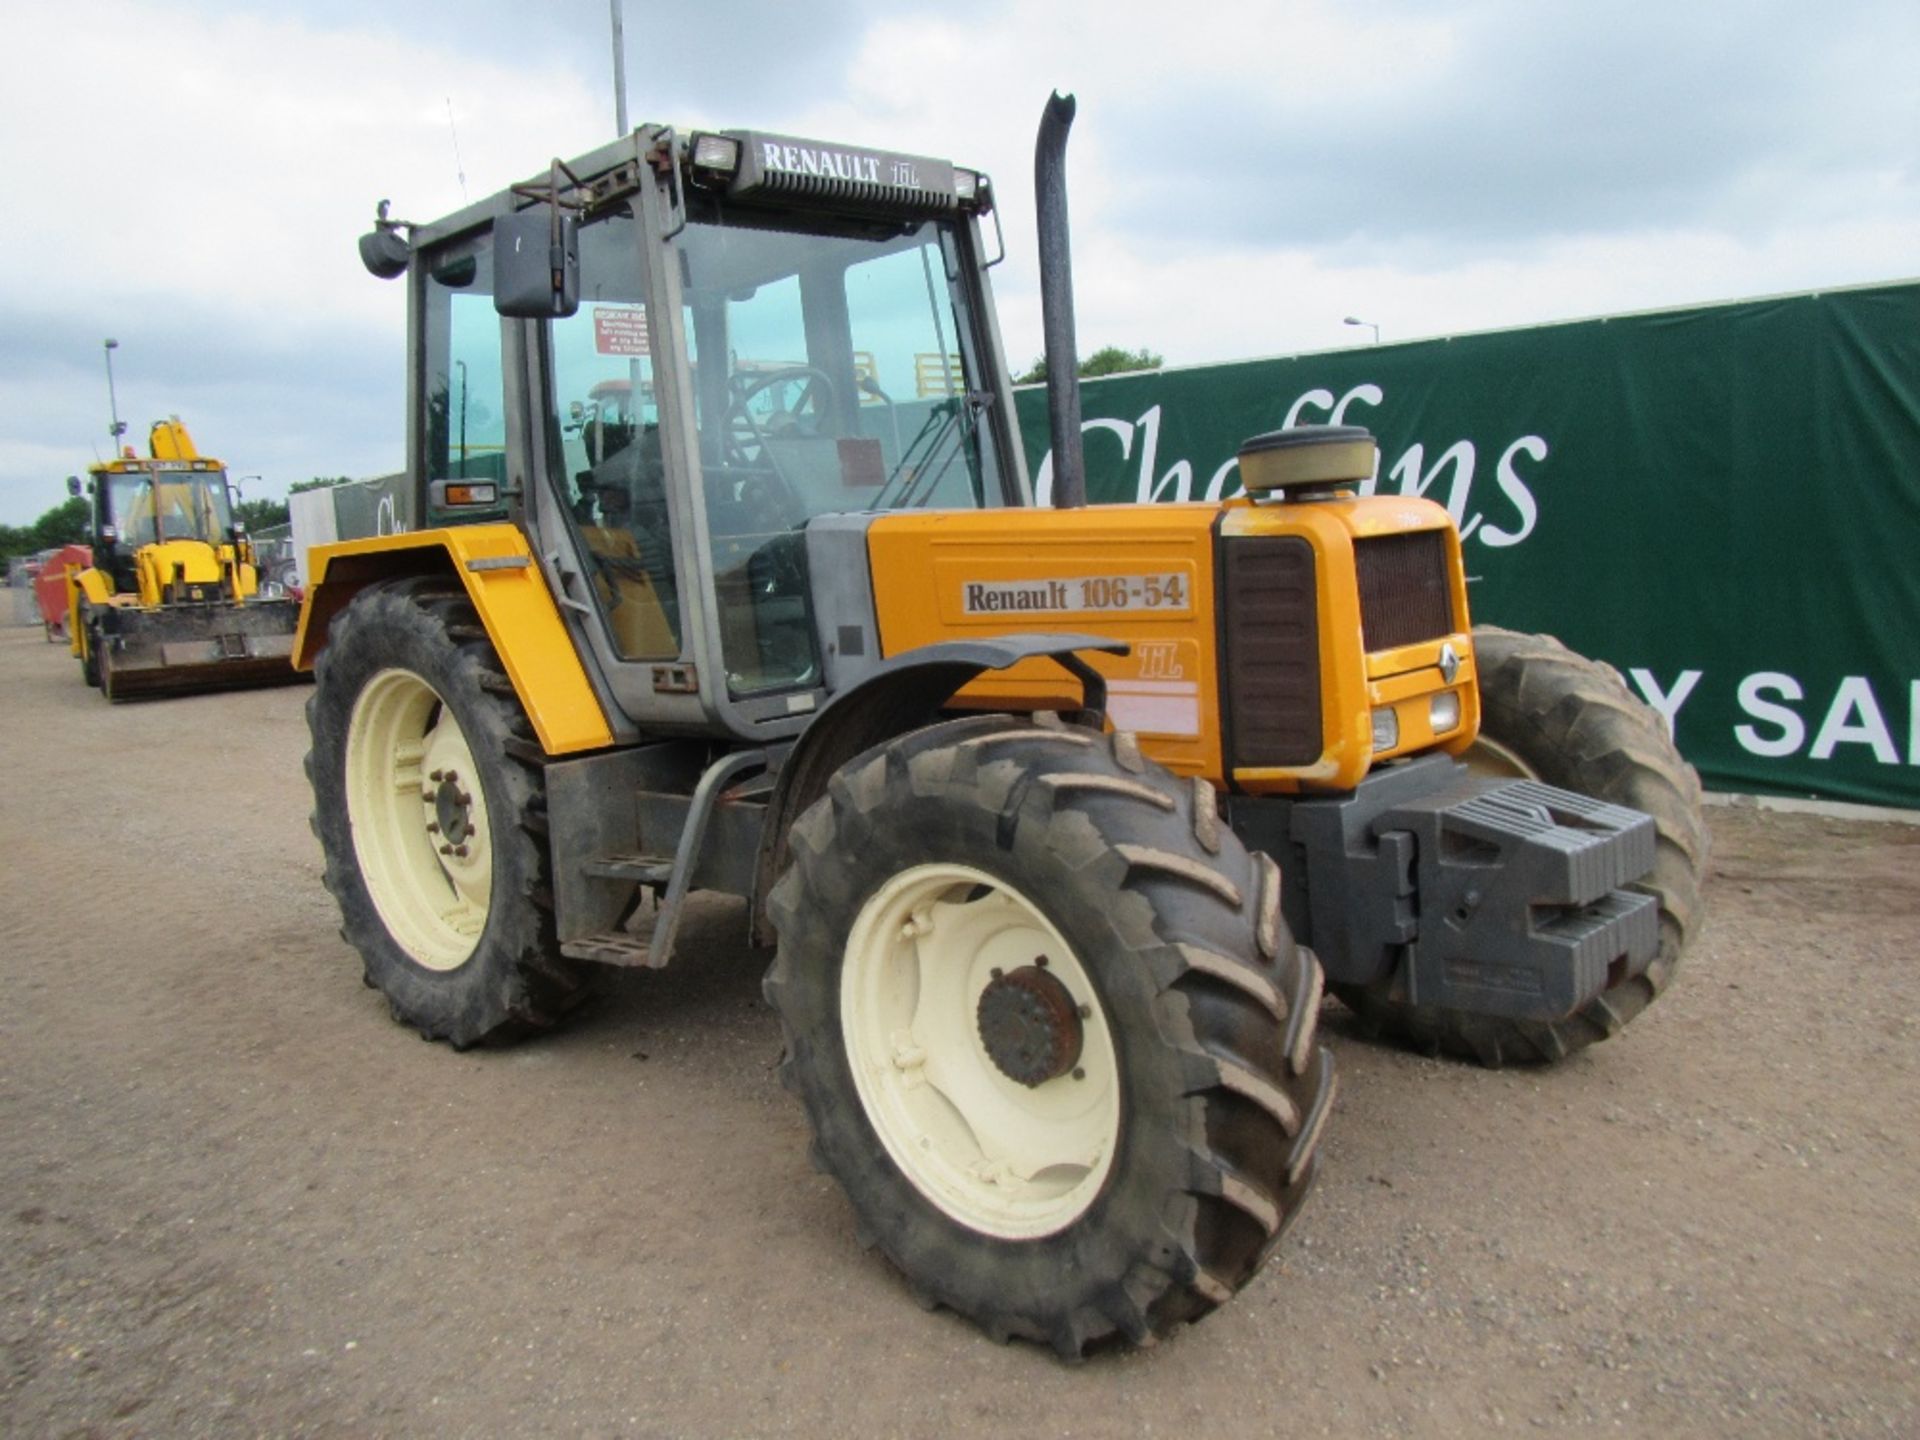 Renault 106-54 TL 4wd Tractor c/w 40k transmission, front weights Reg. No. M895 HSE - Image 3 of 18